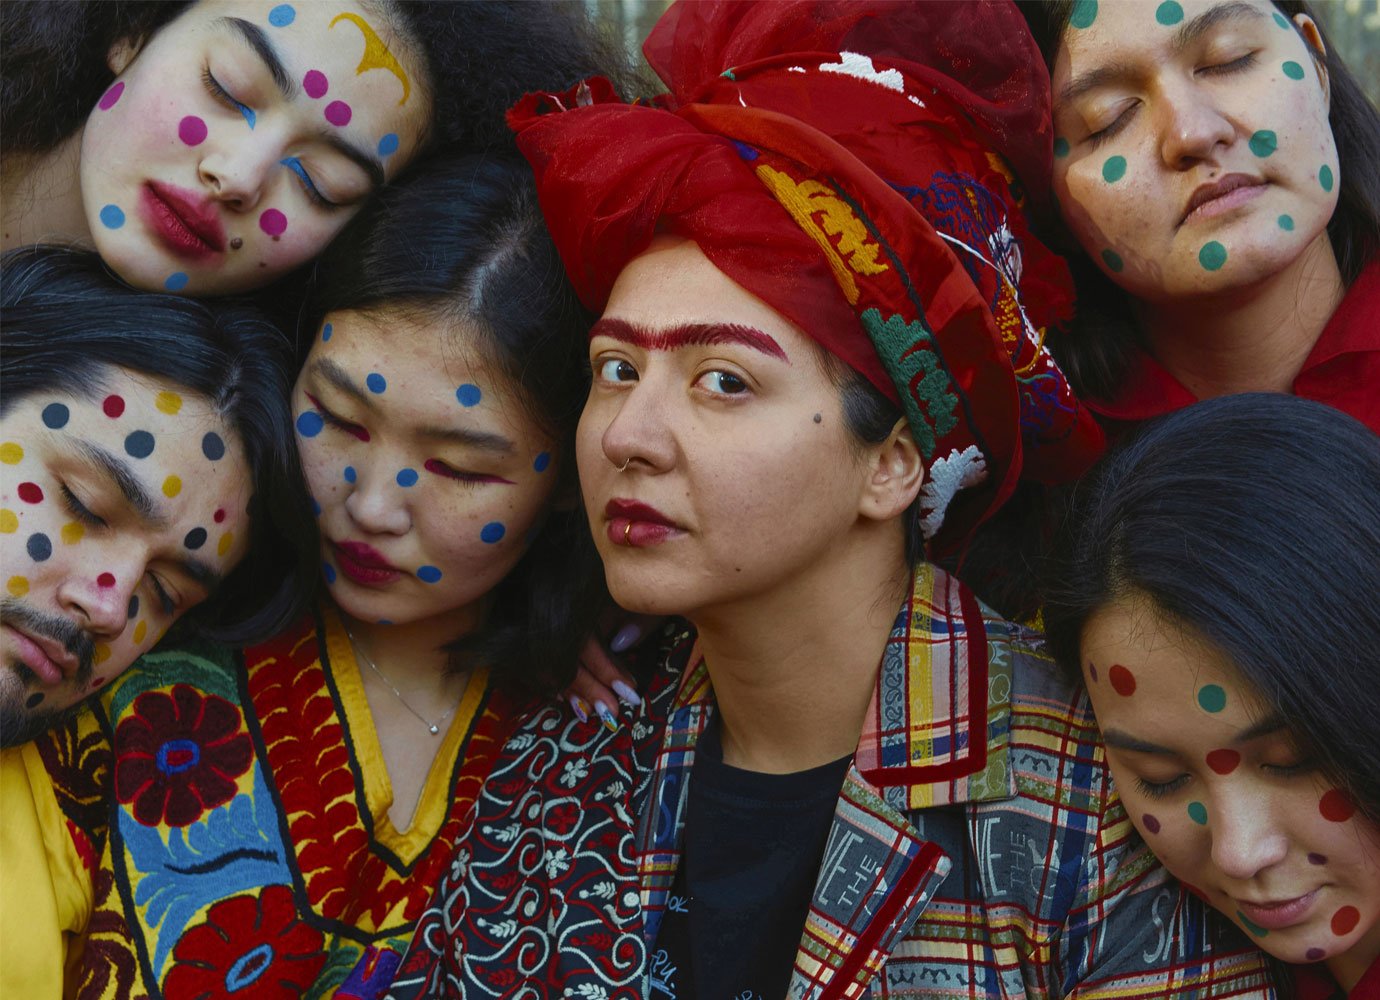 All hail Manizha, the Tajik-Russian musician rewriting the rules on what it means to belong